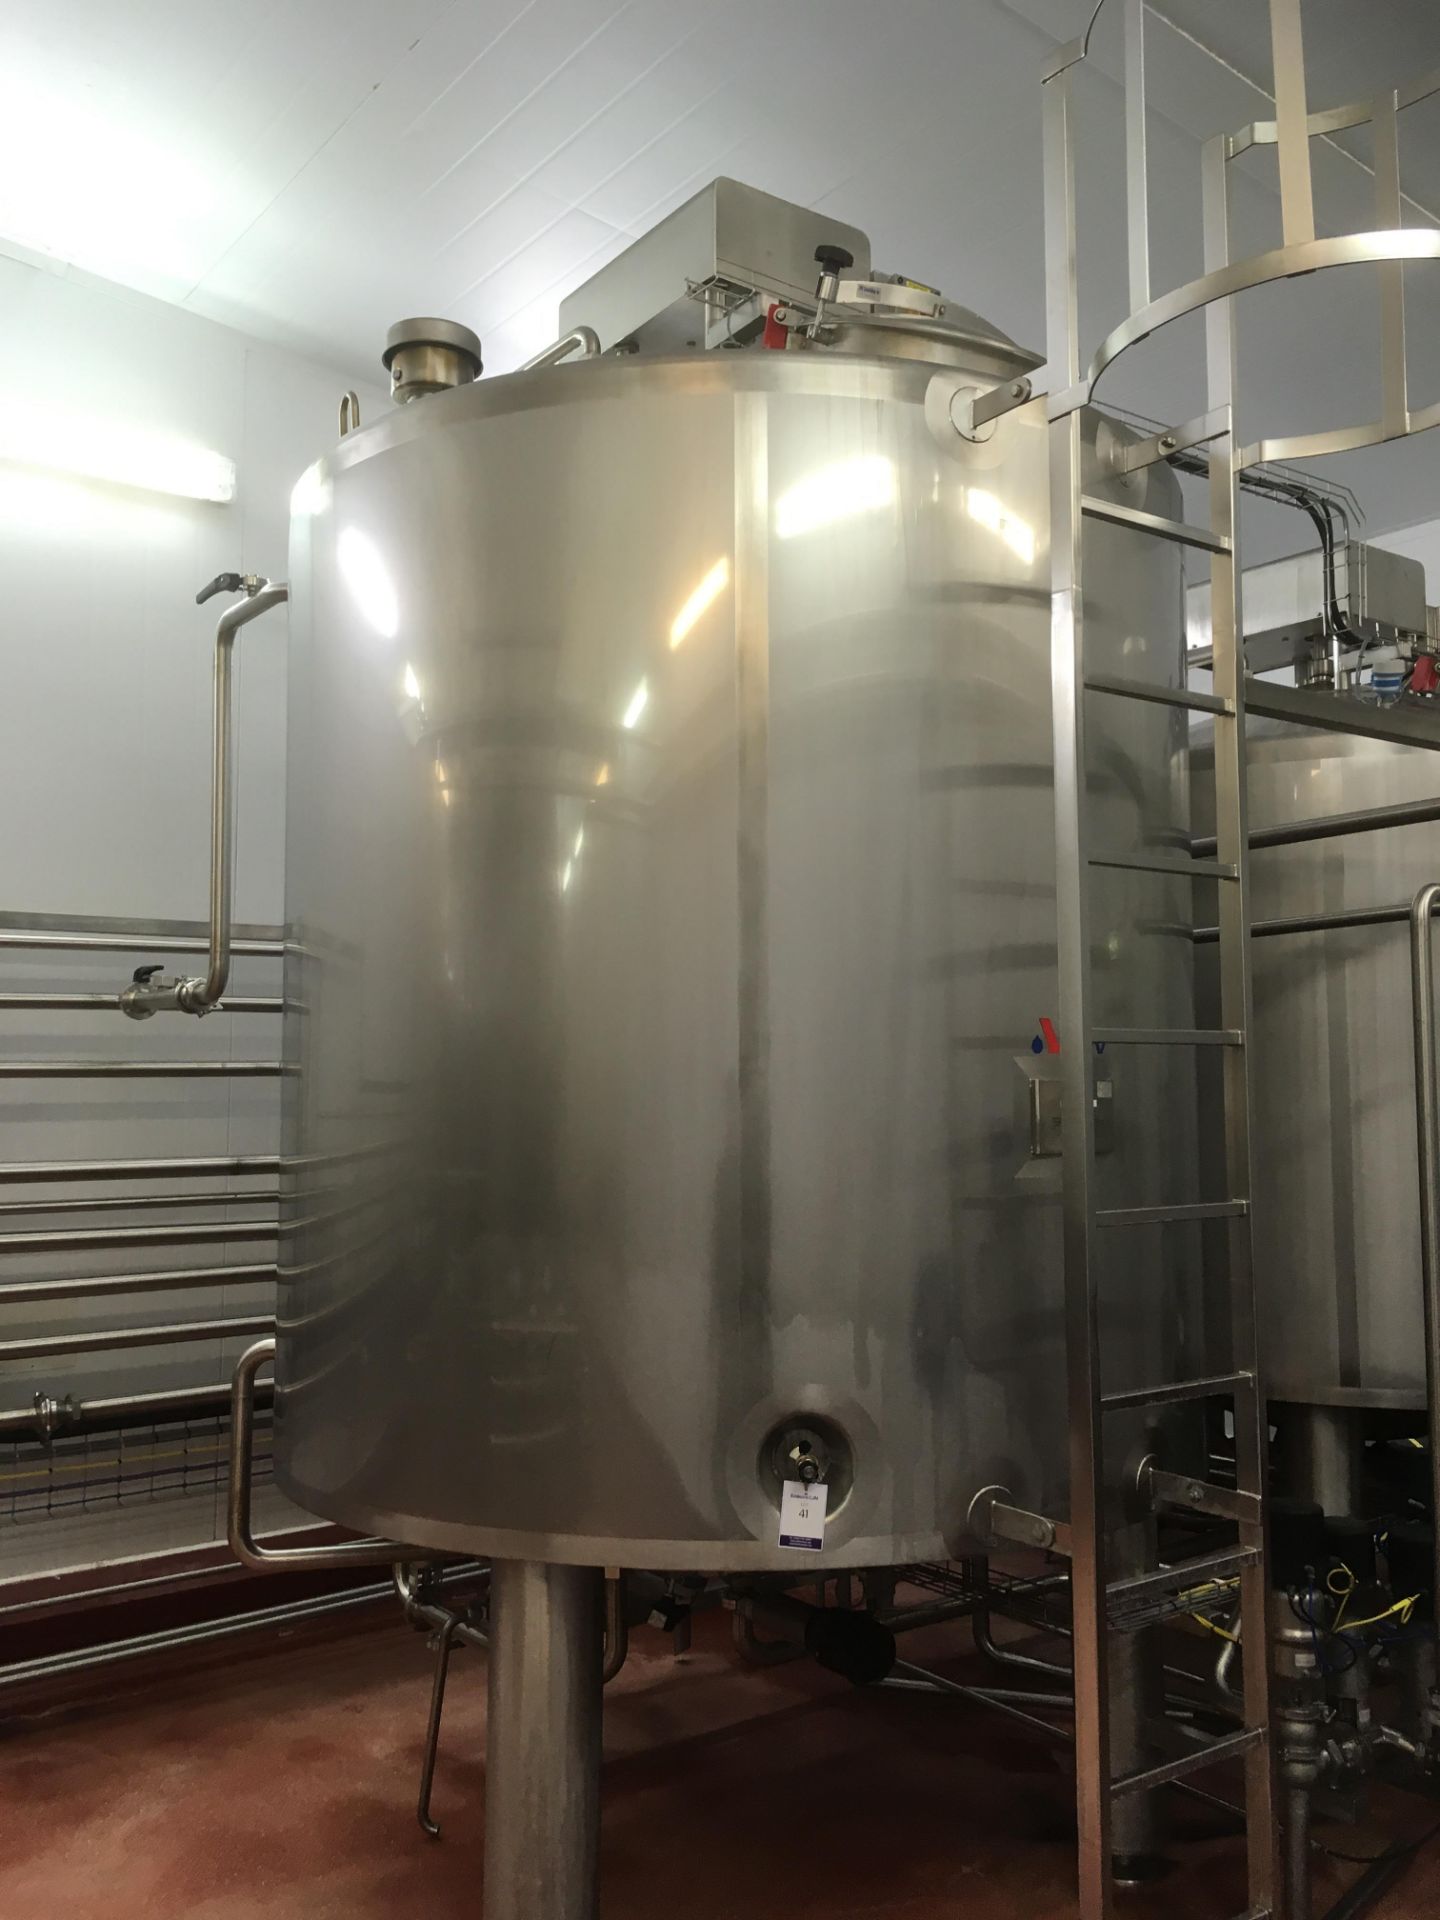 * 2004 JH Stalindustri 6454 Litre Glycol Jacketed finished Cream Tank with Agitator, Full/Empty/